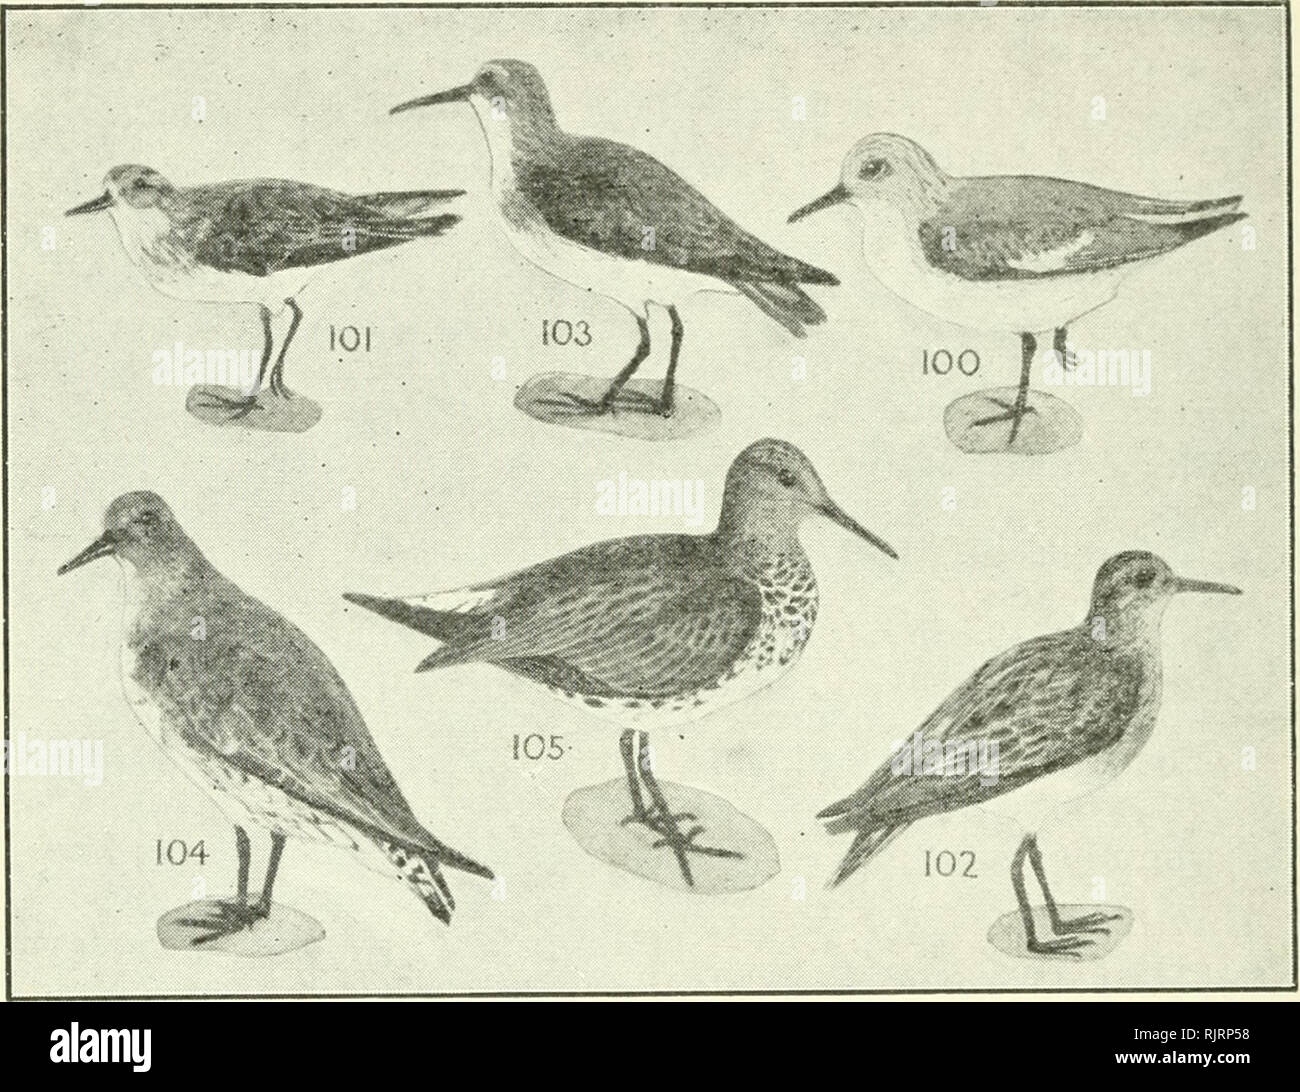 . An Australian bird book : a pocket book for field use. Birds -- Australia Identification. 48 AN AUSTRALIAN BIRD ROOK.. 1 100 Sanderling, Calidris arenaria {leucophoca, Am.O.U.), 1 cos. exc. Pacific Is. Mig. v.r. sandy shores, swa7nps 7.5 Crown, back gray; white band on wing; sides, lower-back white; eyebrow, forehead, face, under white; no hind toe; brighter in far north; f., sim. Sand-hoppers, insects. &quot;Wick.&quot; remarkable of such organs. The Australian Avocet is one species of a cosmopolitan genus. Some of the Dottrels live on the dry, open plains of the interior; others frequent t Stock Photo